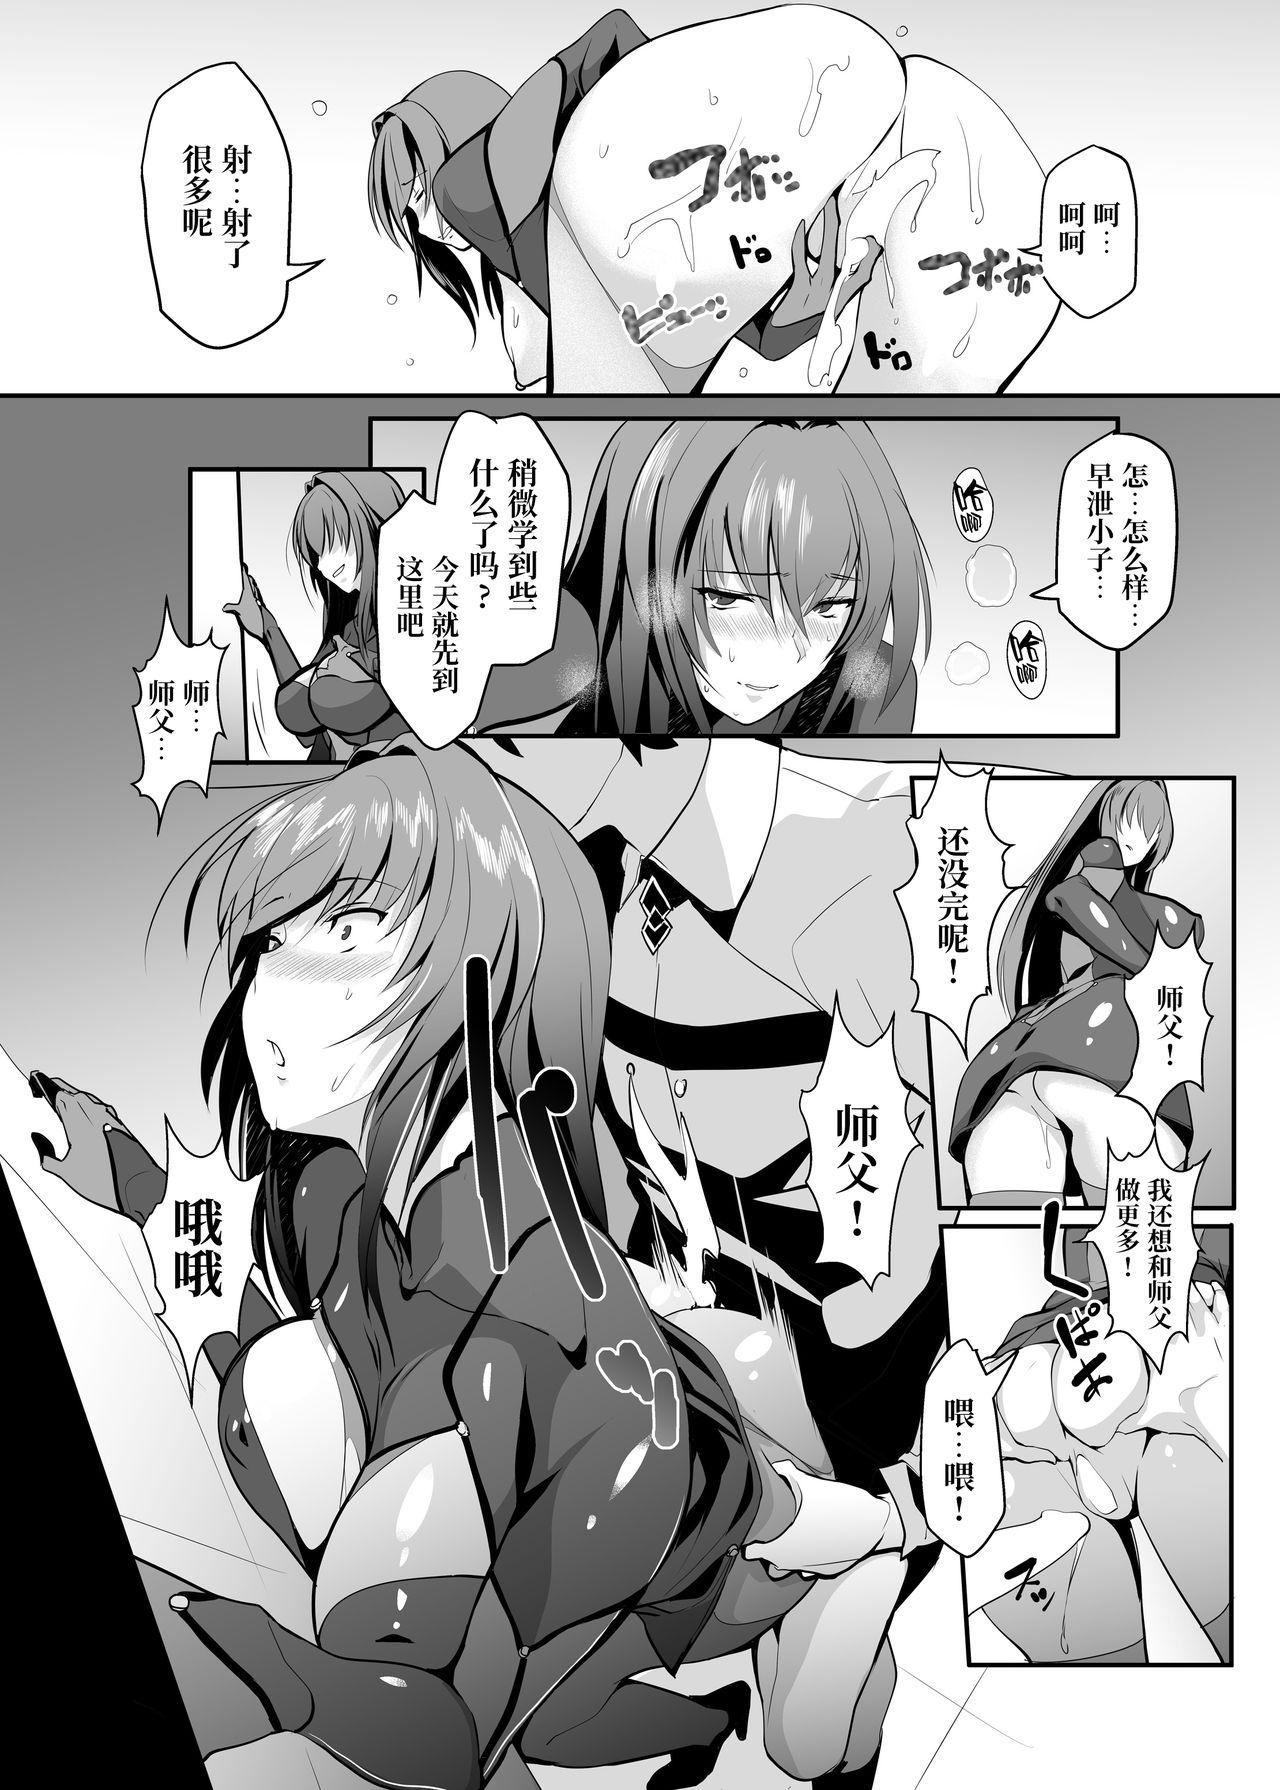 Stunning Scathach Shishou no Dosukebe Lesson - Fate grand order Cutie - Page 12